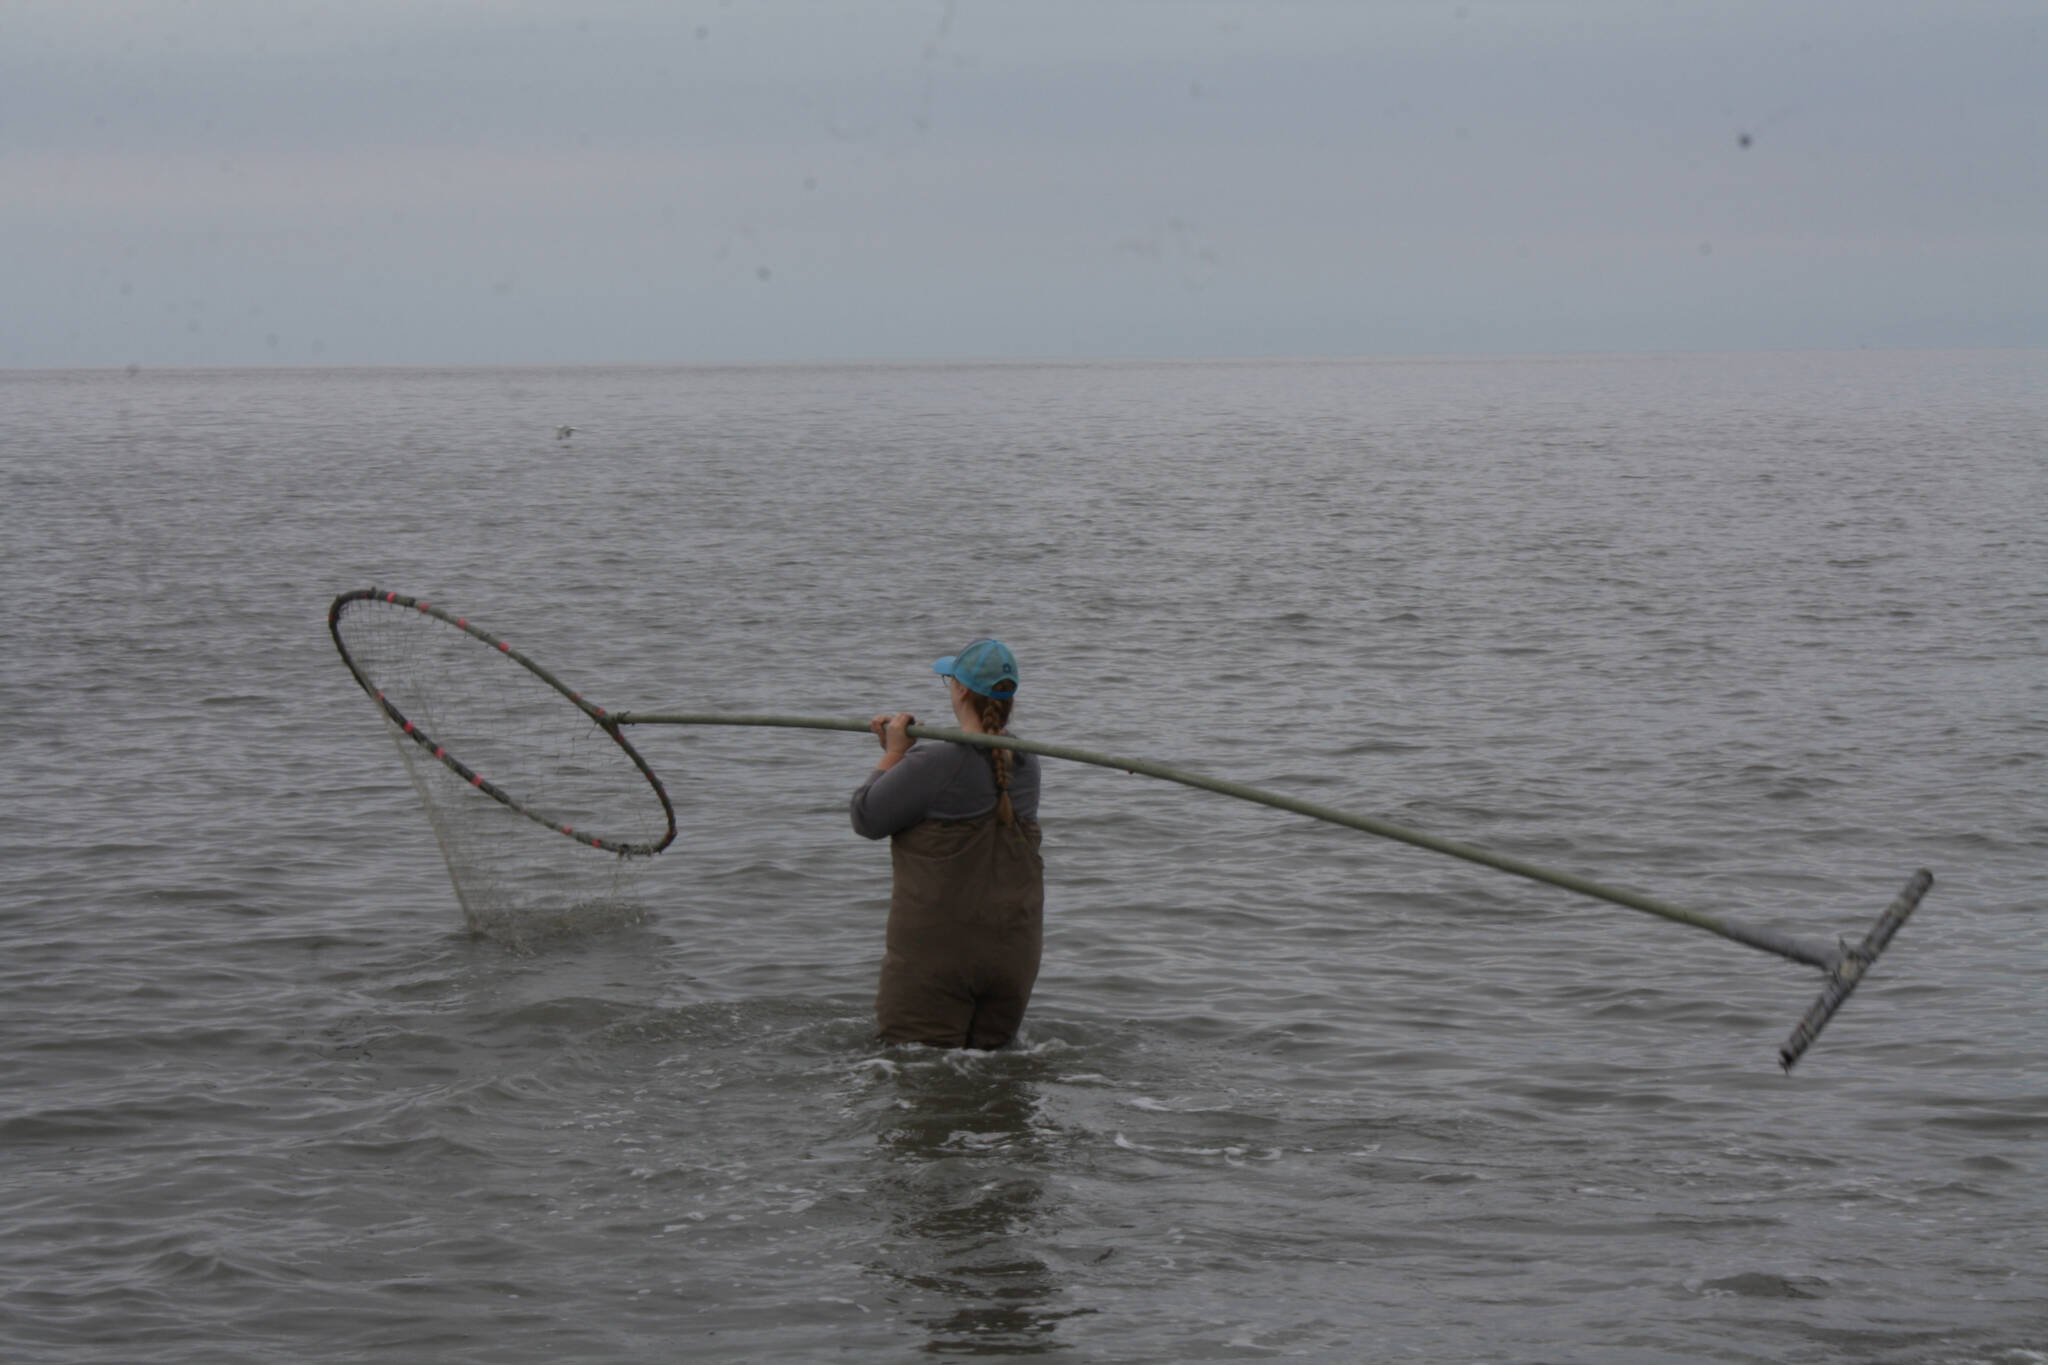 Kristen Stearns fishes at North Kenai Beach on Tuesday, July 12, 2022. (Camille Botello/Peninsula Clarion)